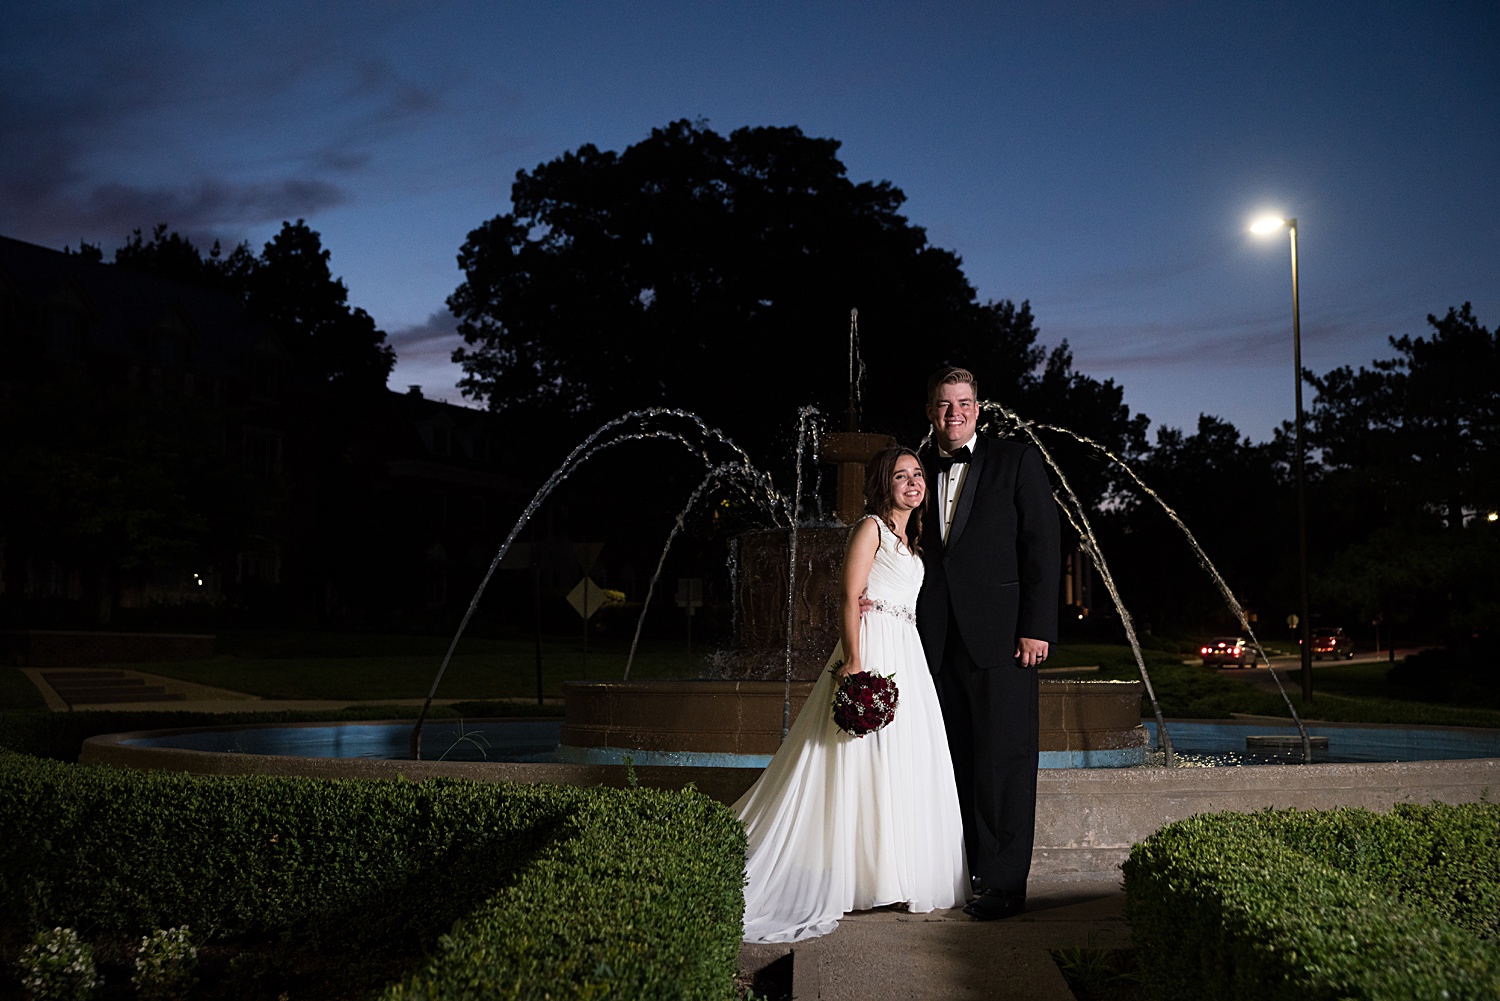 Wedding photo in front of fountain at KU's campus.